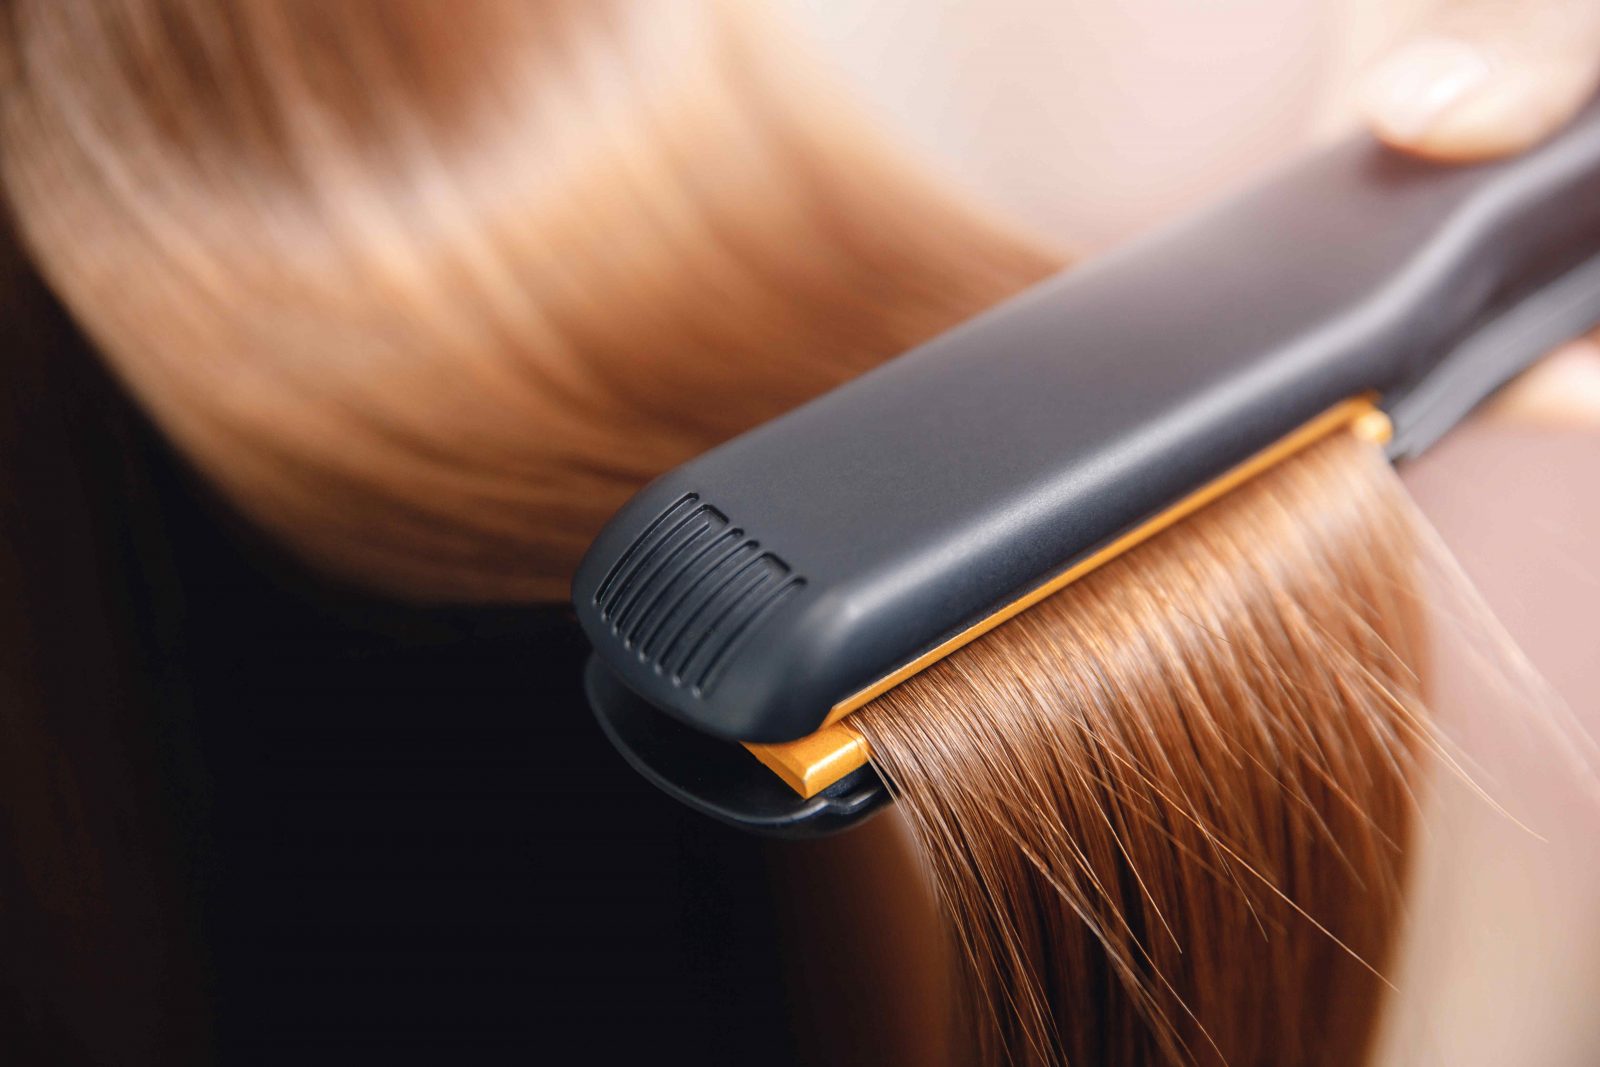 The Power Of The Sun Is Like Putting A Flatiron To Your Hair - Haute Beauty  by Haute Living